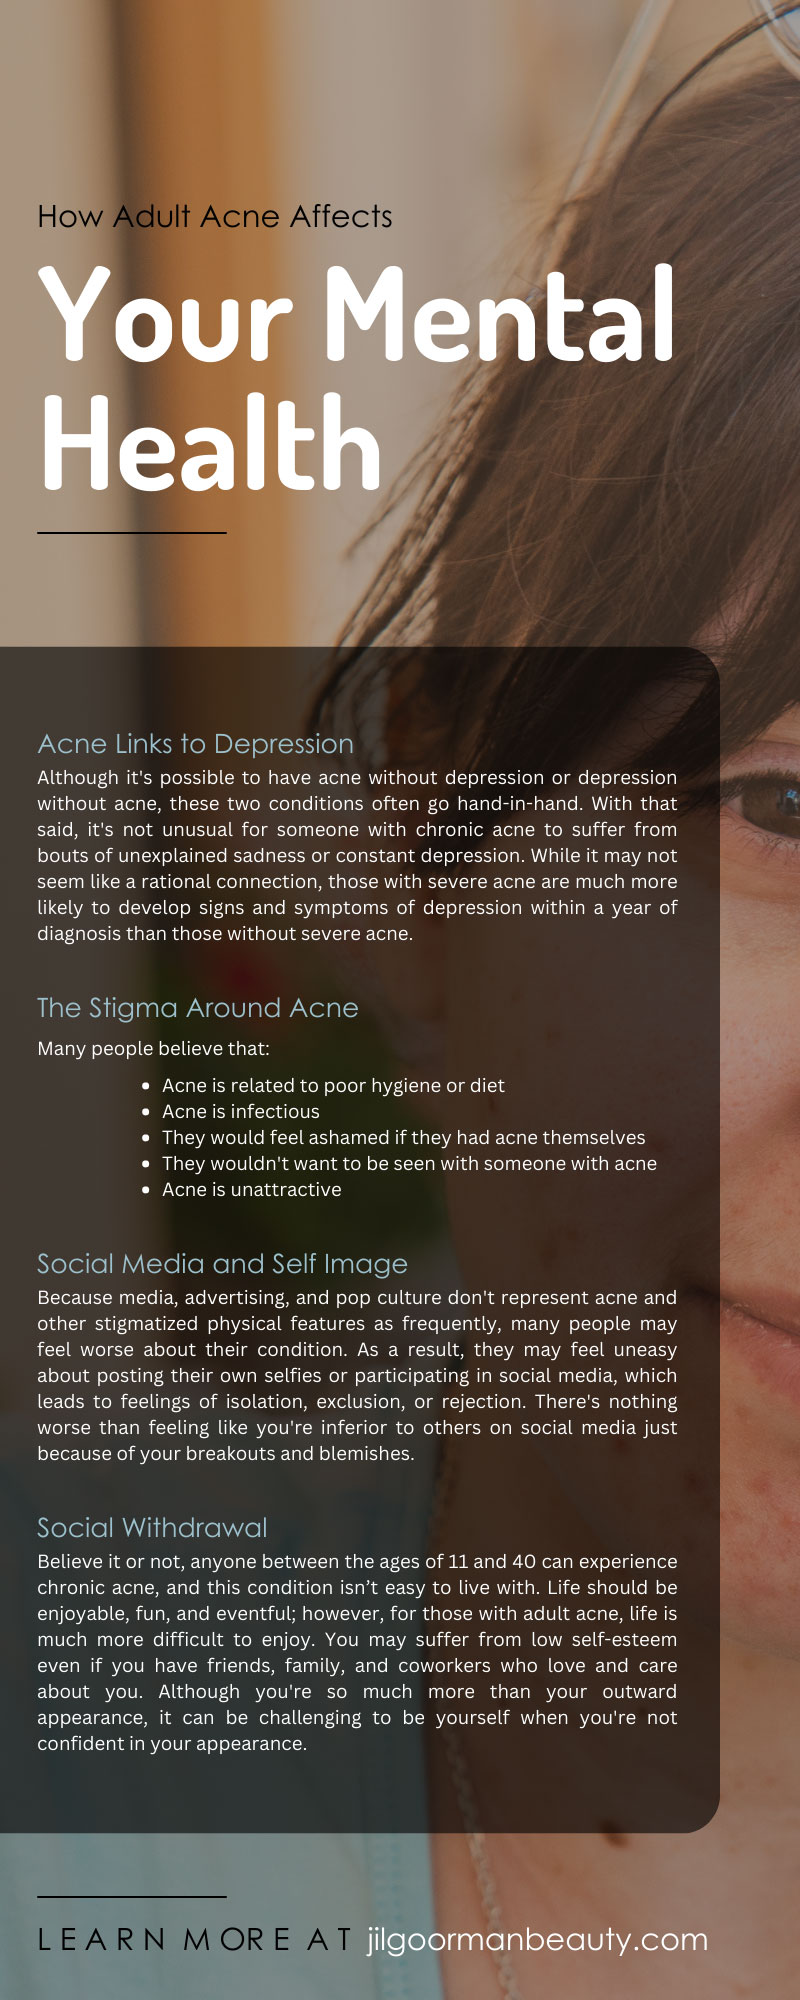 How Adult Acne Affects Your Mental Health